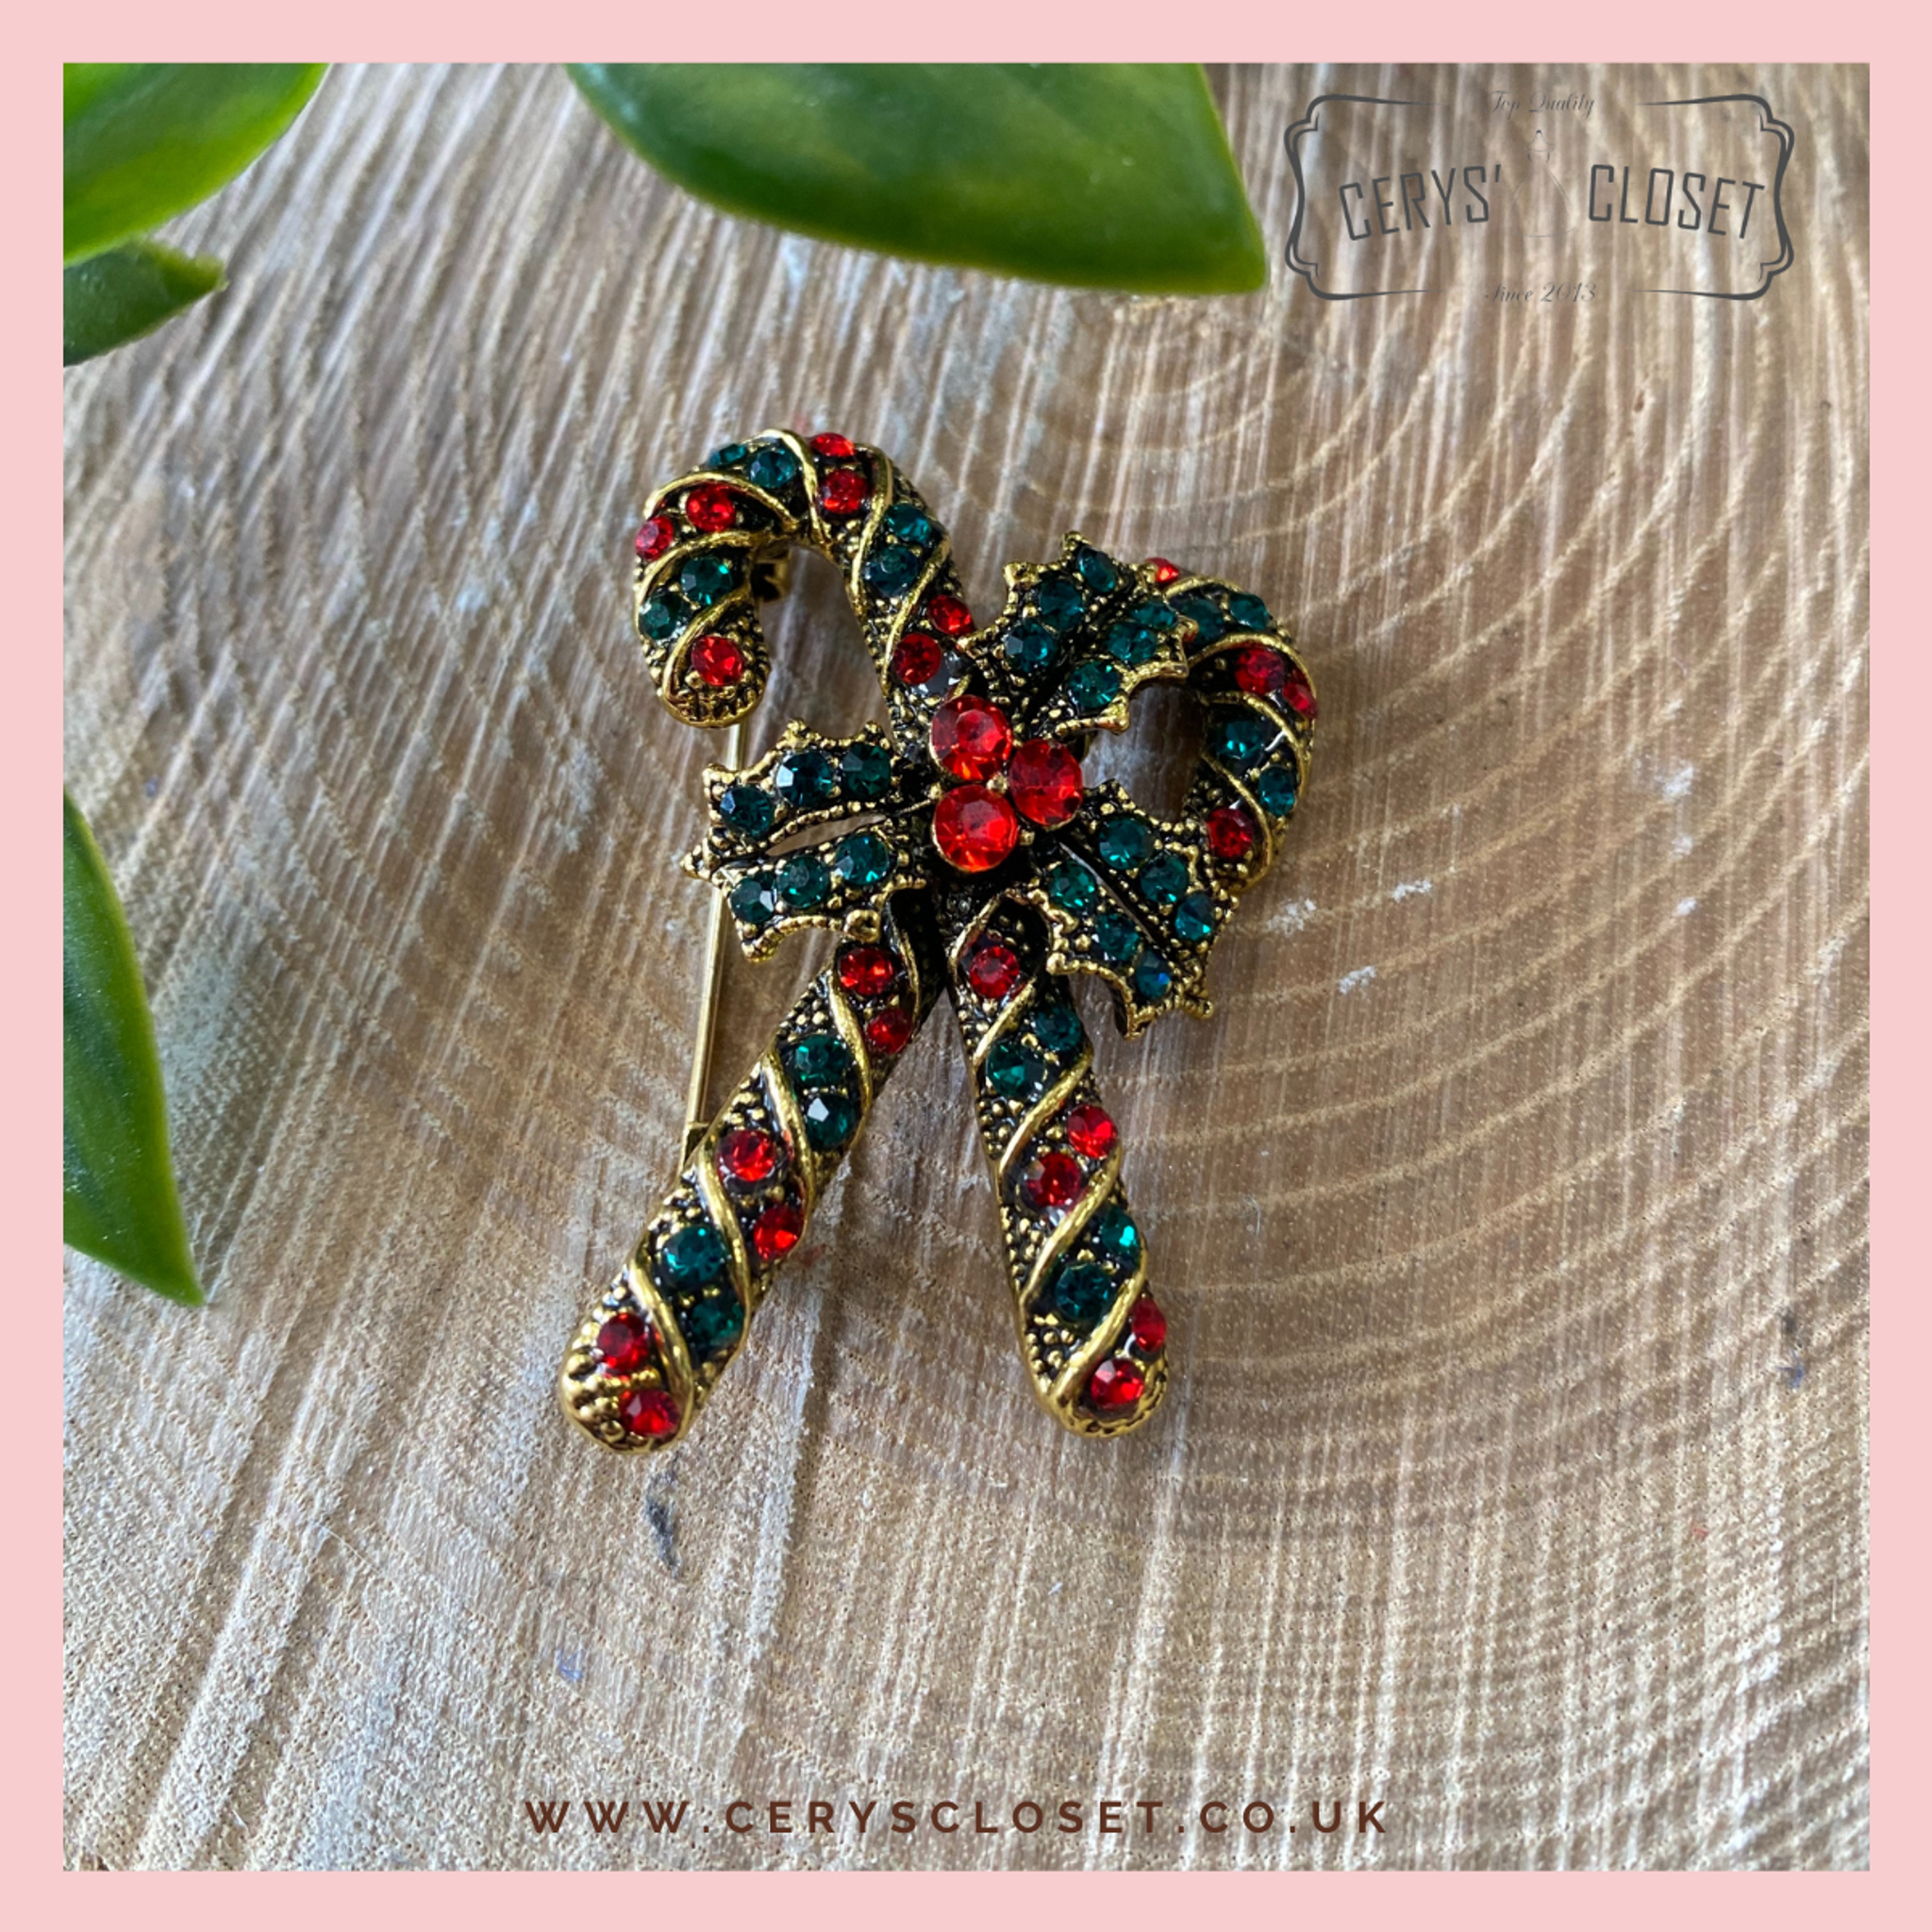 Wrapables Christmas Crystal Rhinestone Brooch Pin Candy Canes